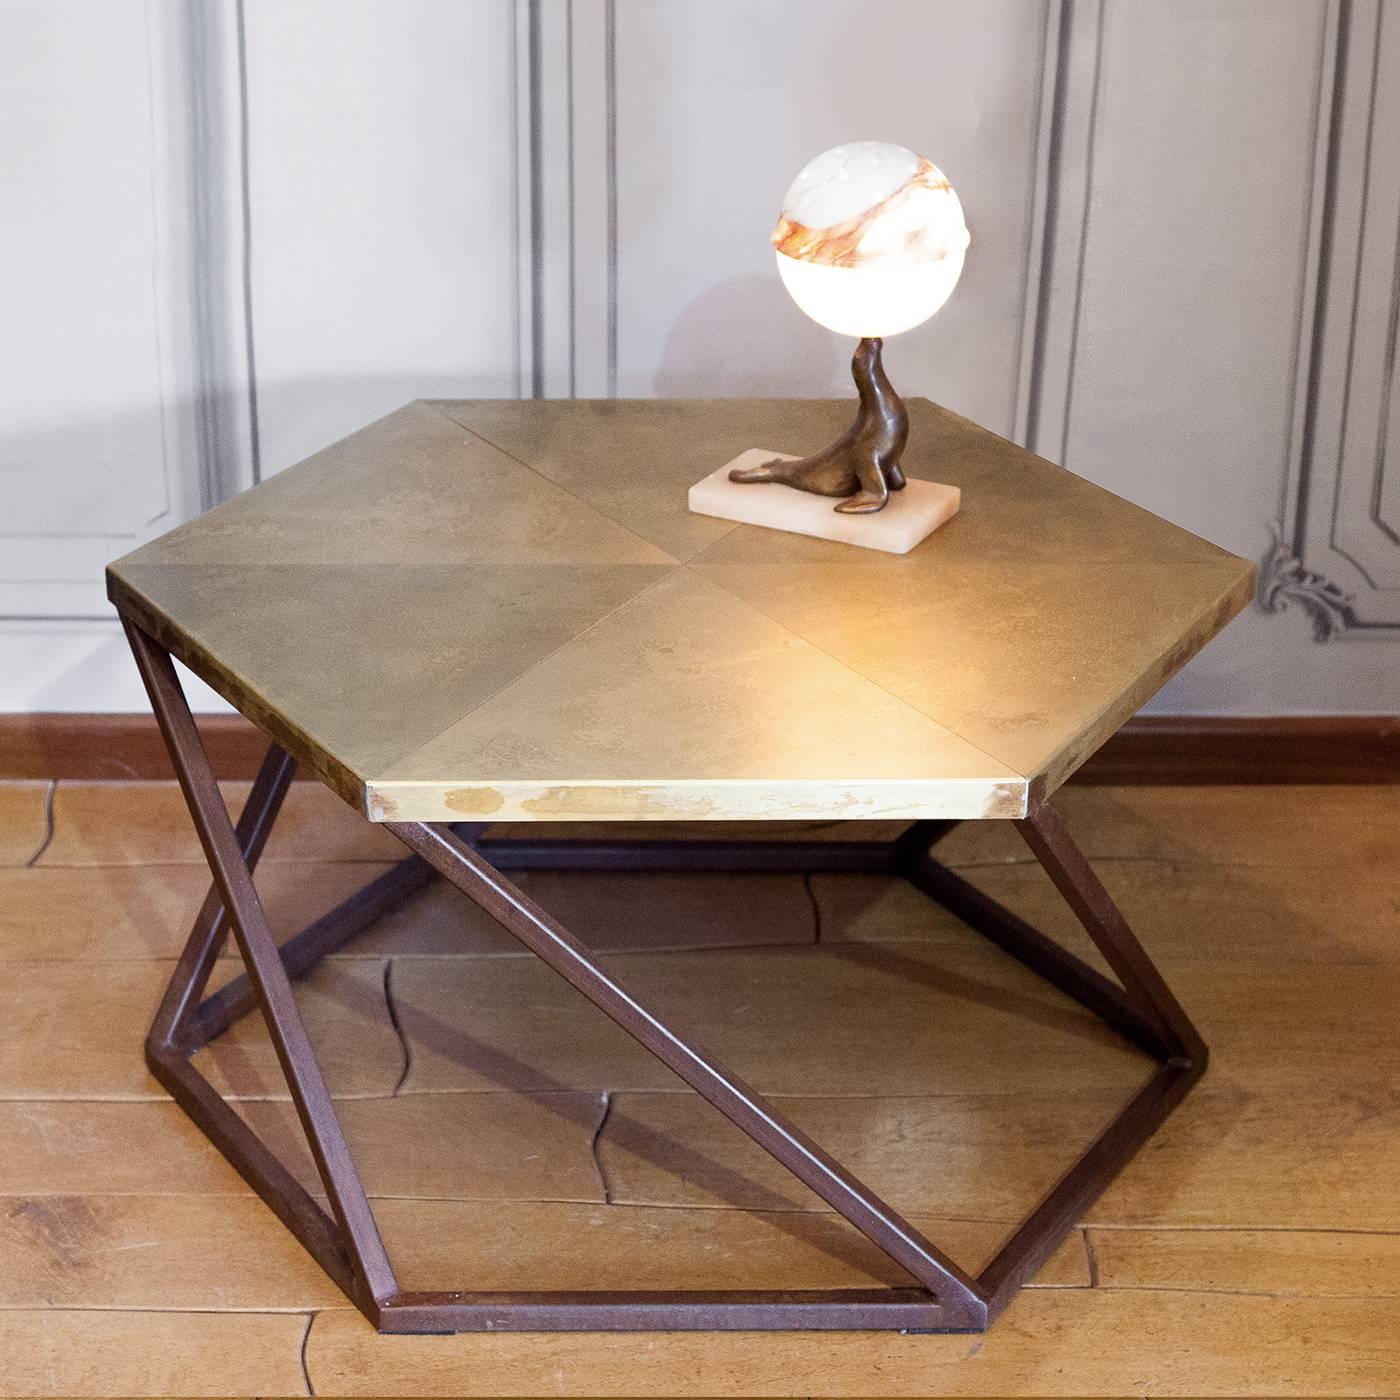 This sophisticated coffee table features a hexagonal base in oxidized iron from which its legs stem diagonally to connect to the corners of the hexagon that directly supports the top. The top is in multi-ply wood with a cover in triangular sheets of